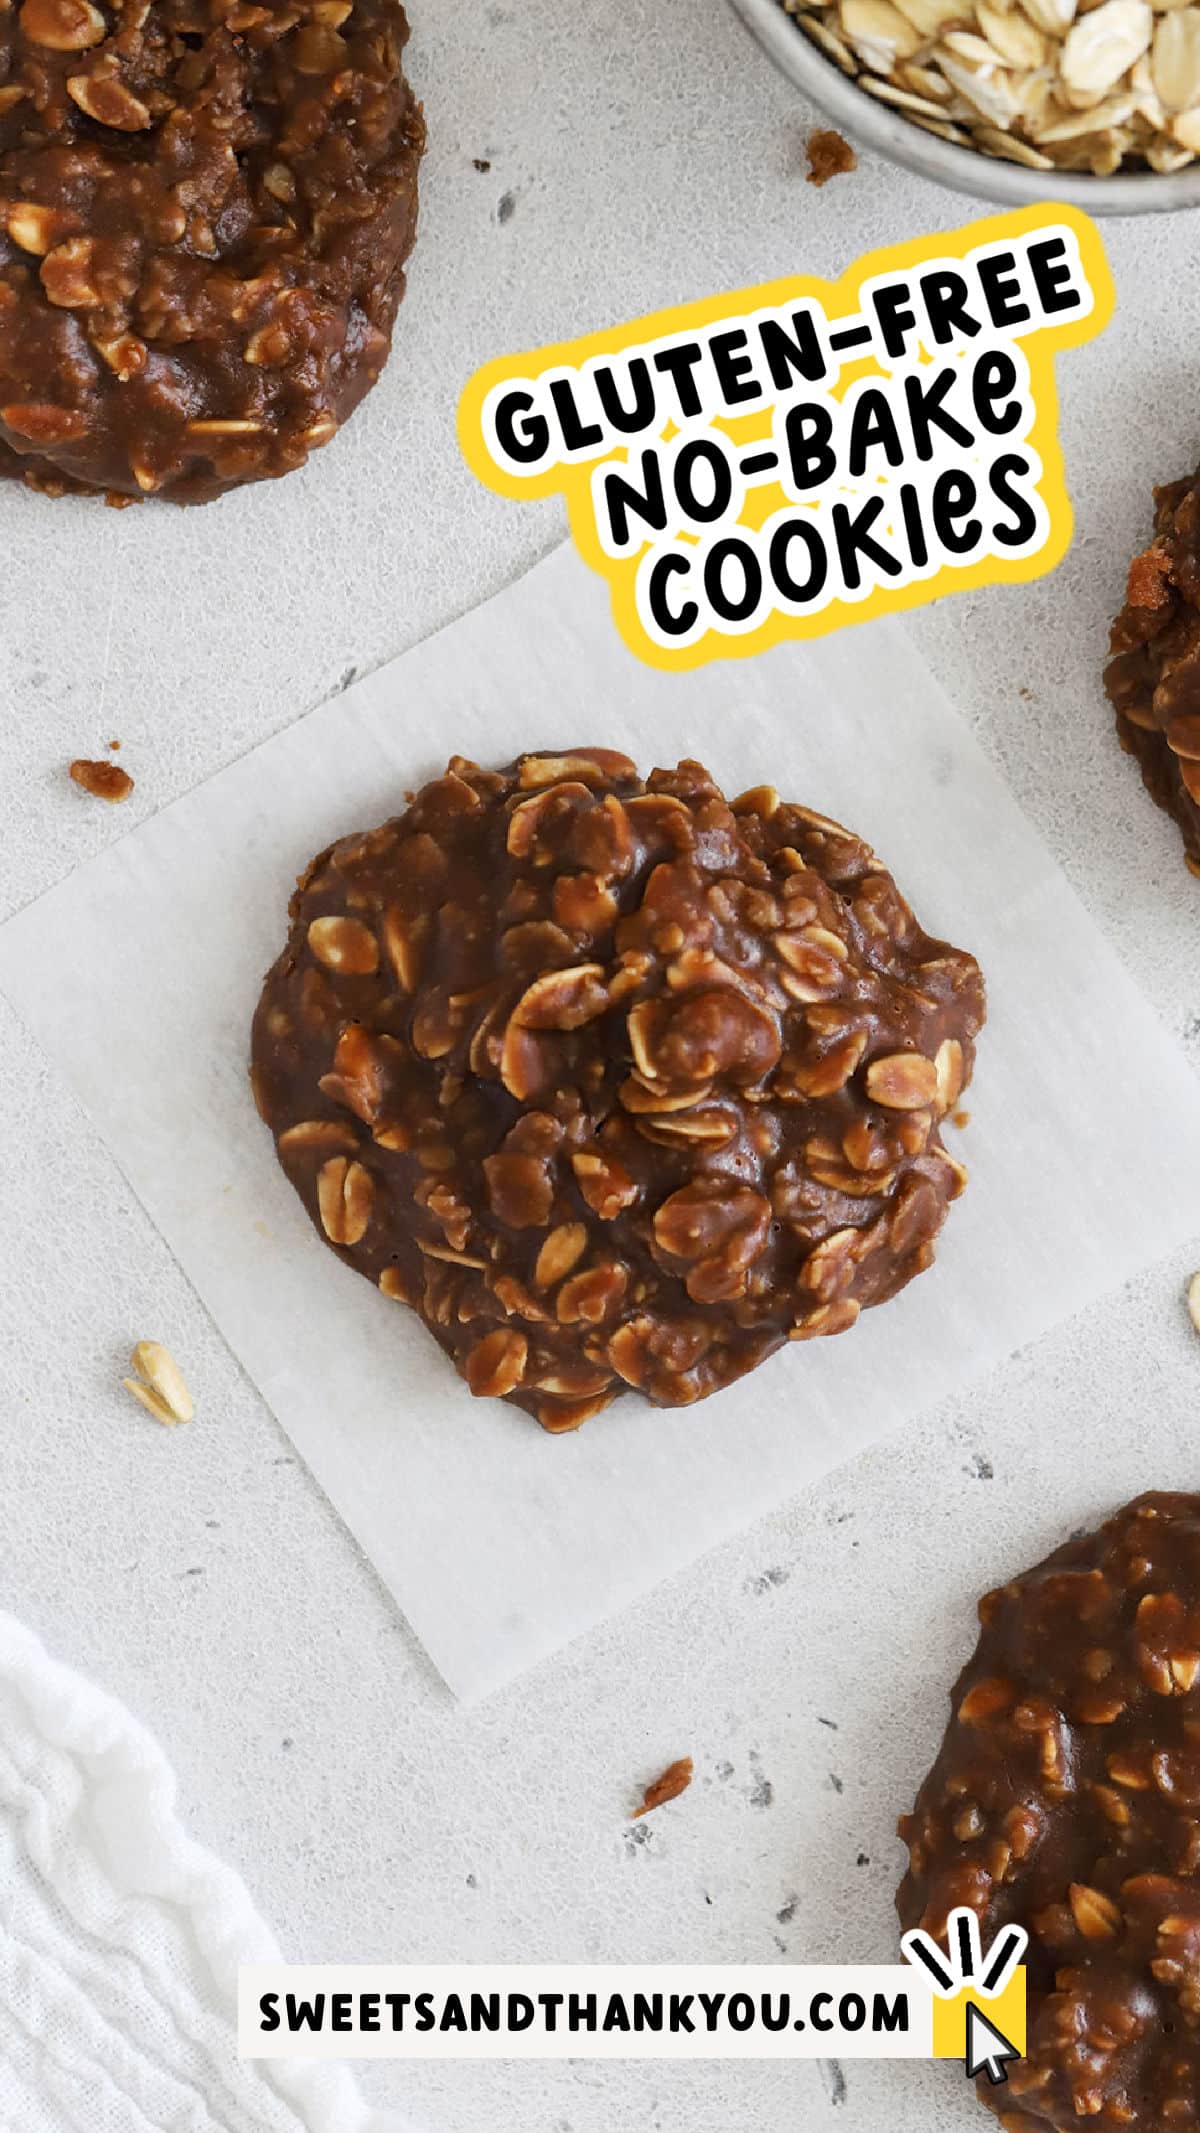 The BEST Gluten-Free No-Bake Cookies around! These gluten-free chocolate peanut butter no-bake cookies have all the flavor you love, simply made gluten-free! Made on the stove with simple ingredients, they're the perfect easy gluten-free treat when you don't want to turn on the oven. 